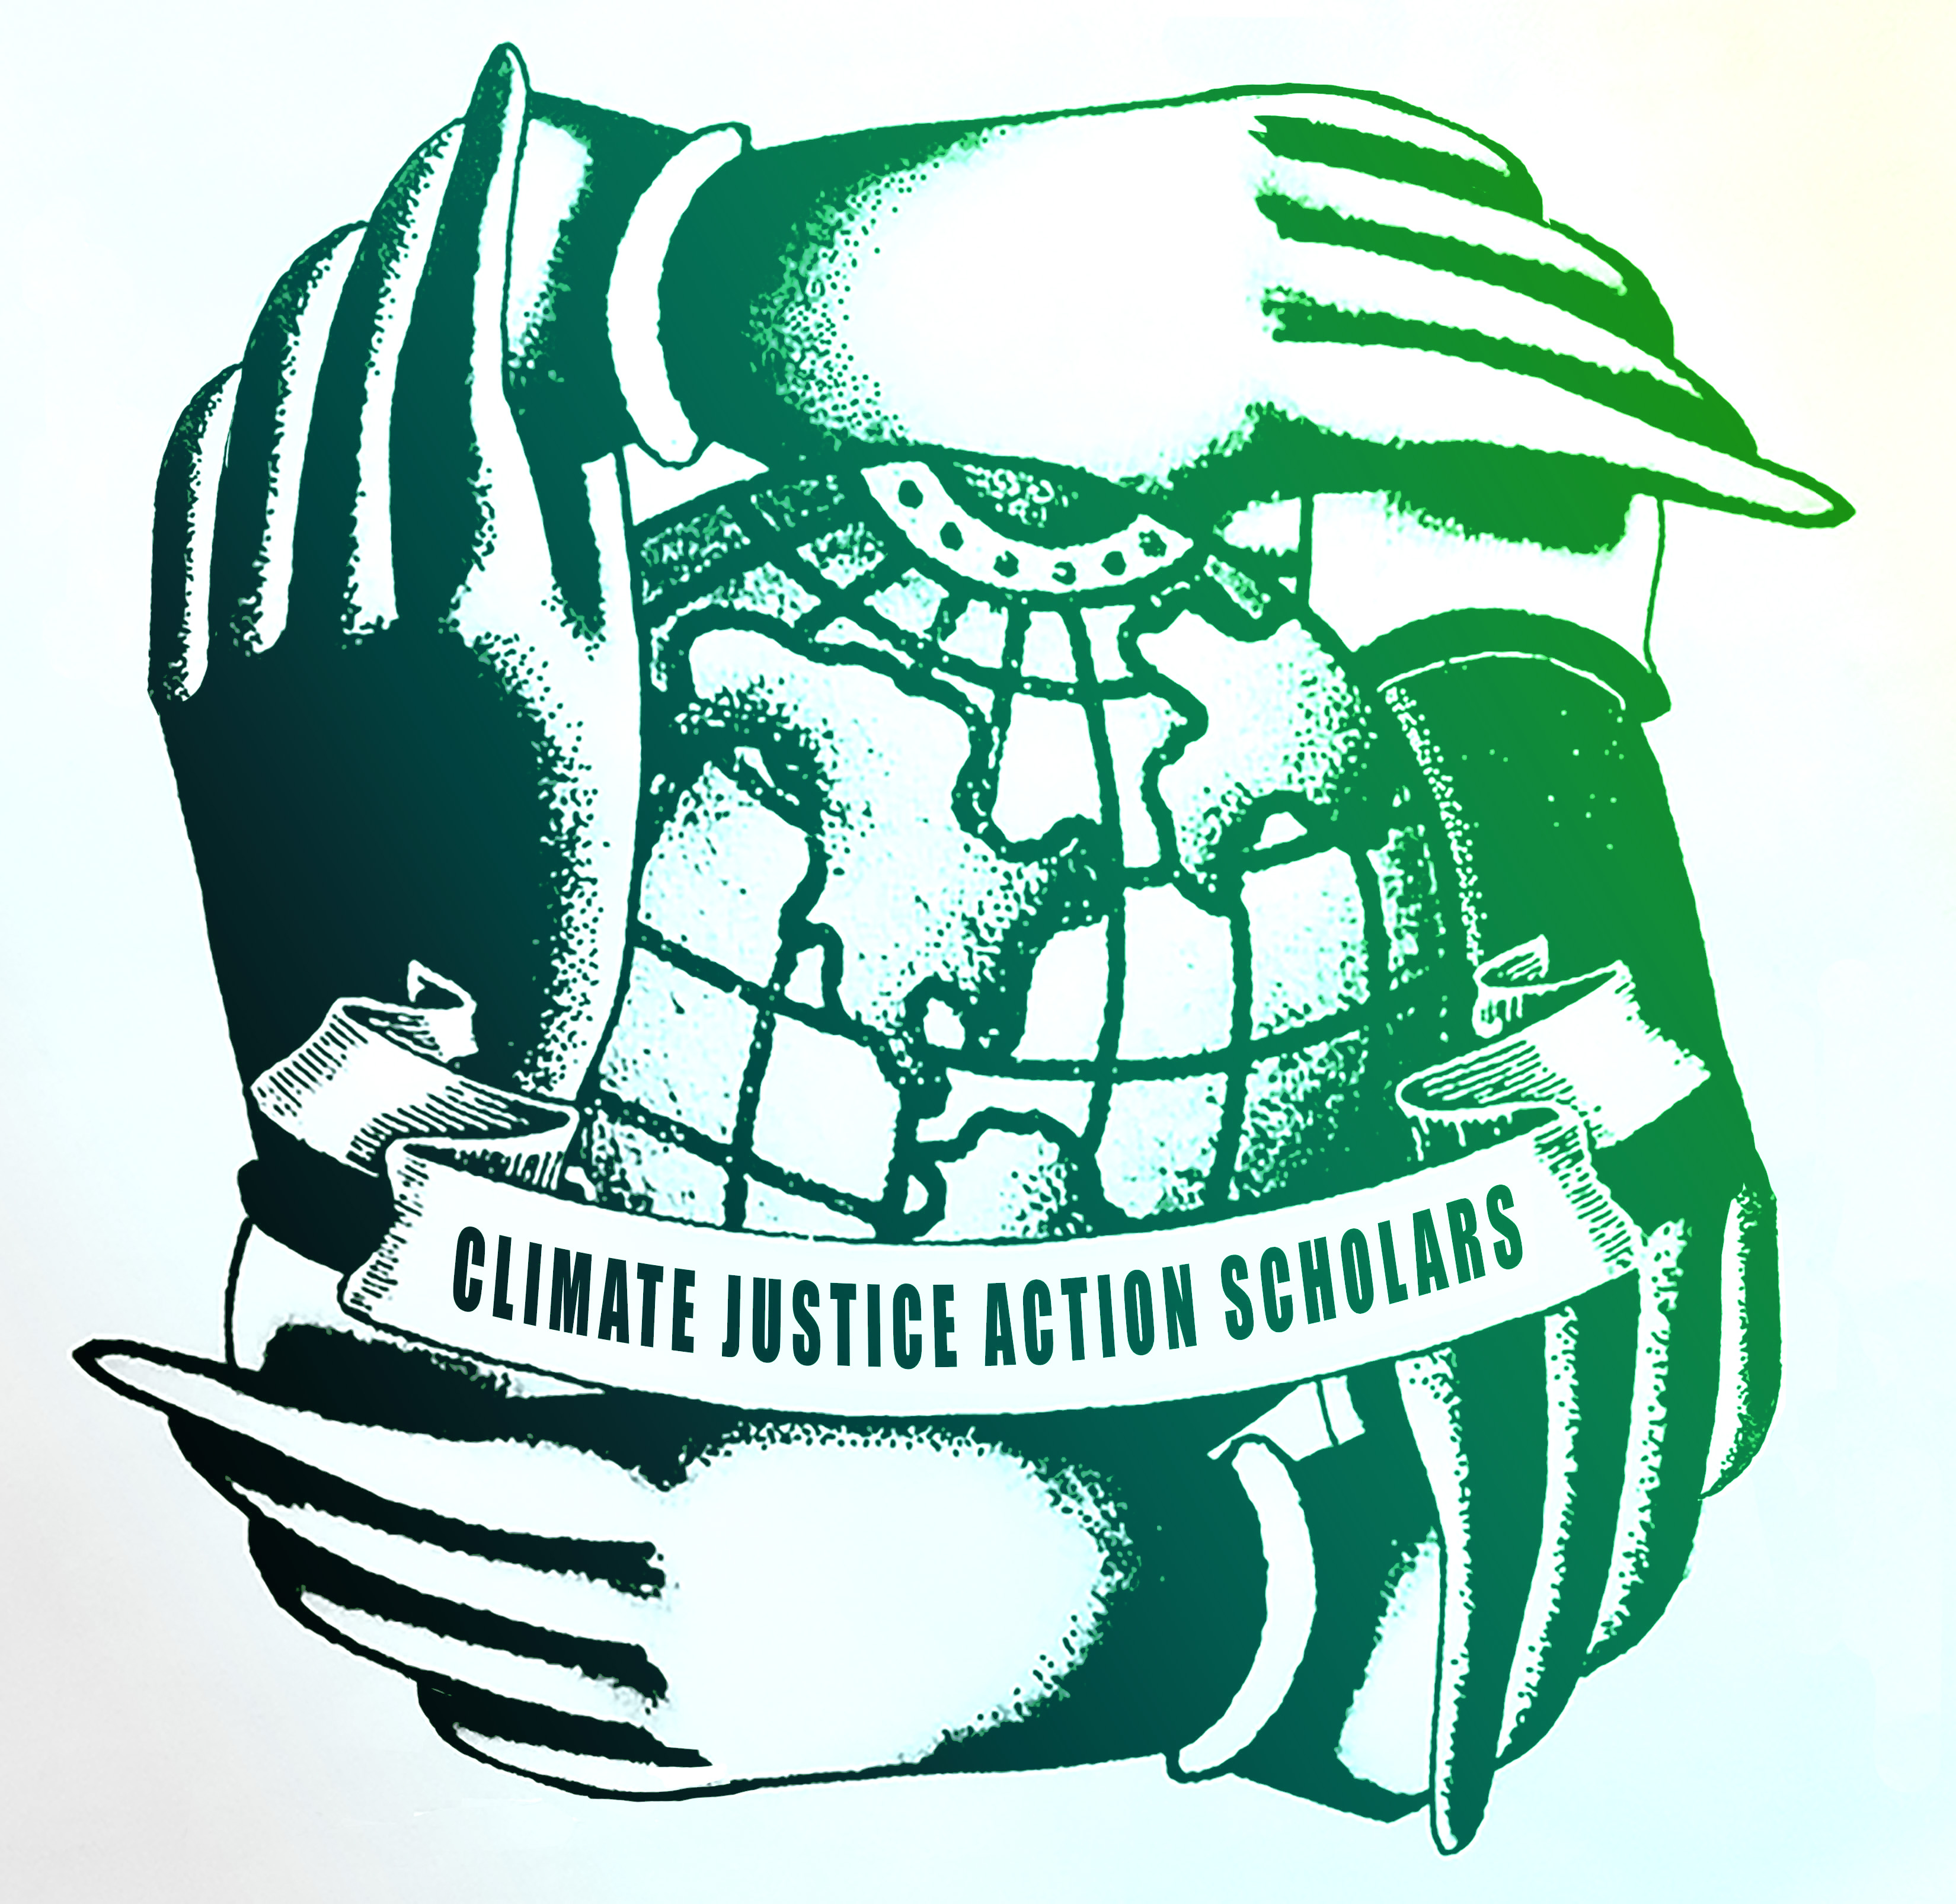 Climate-Justice_Action-Scholars-logo-with-color.jpg